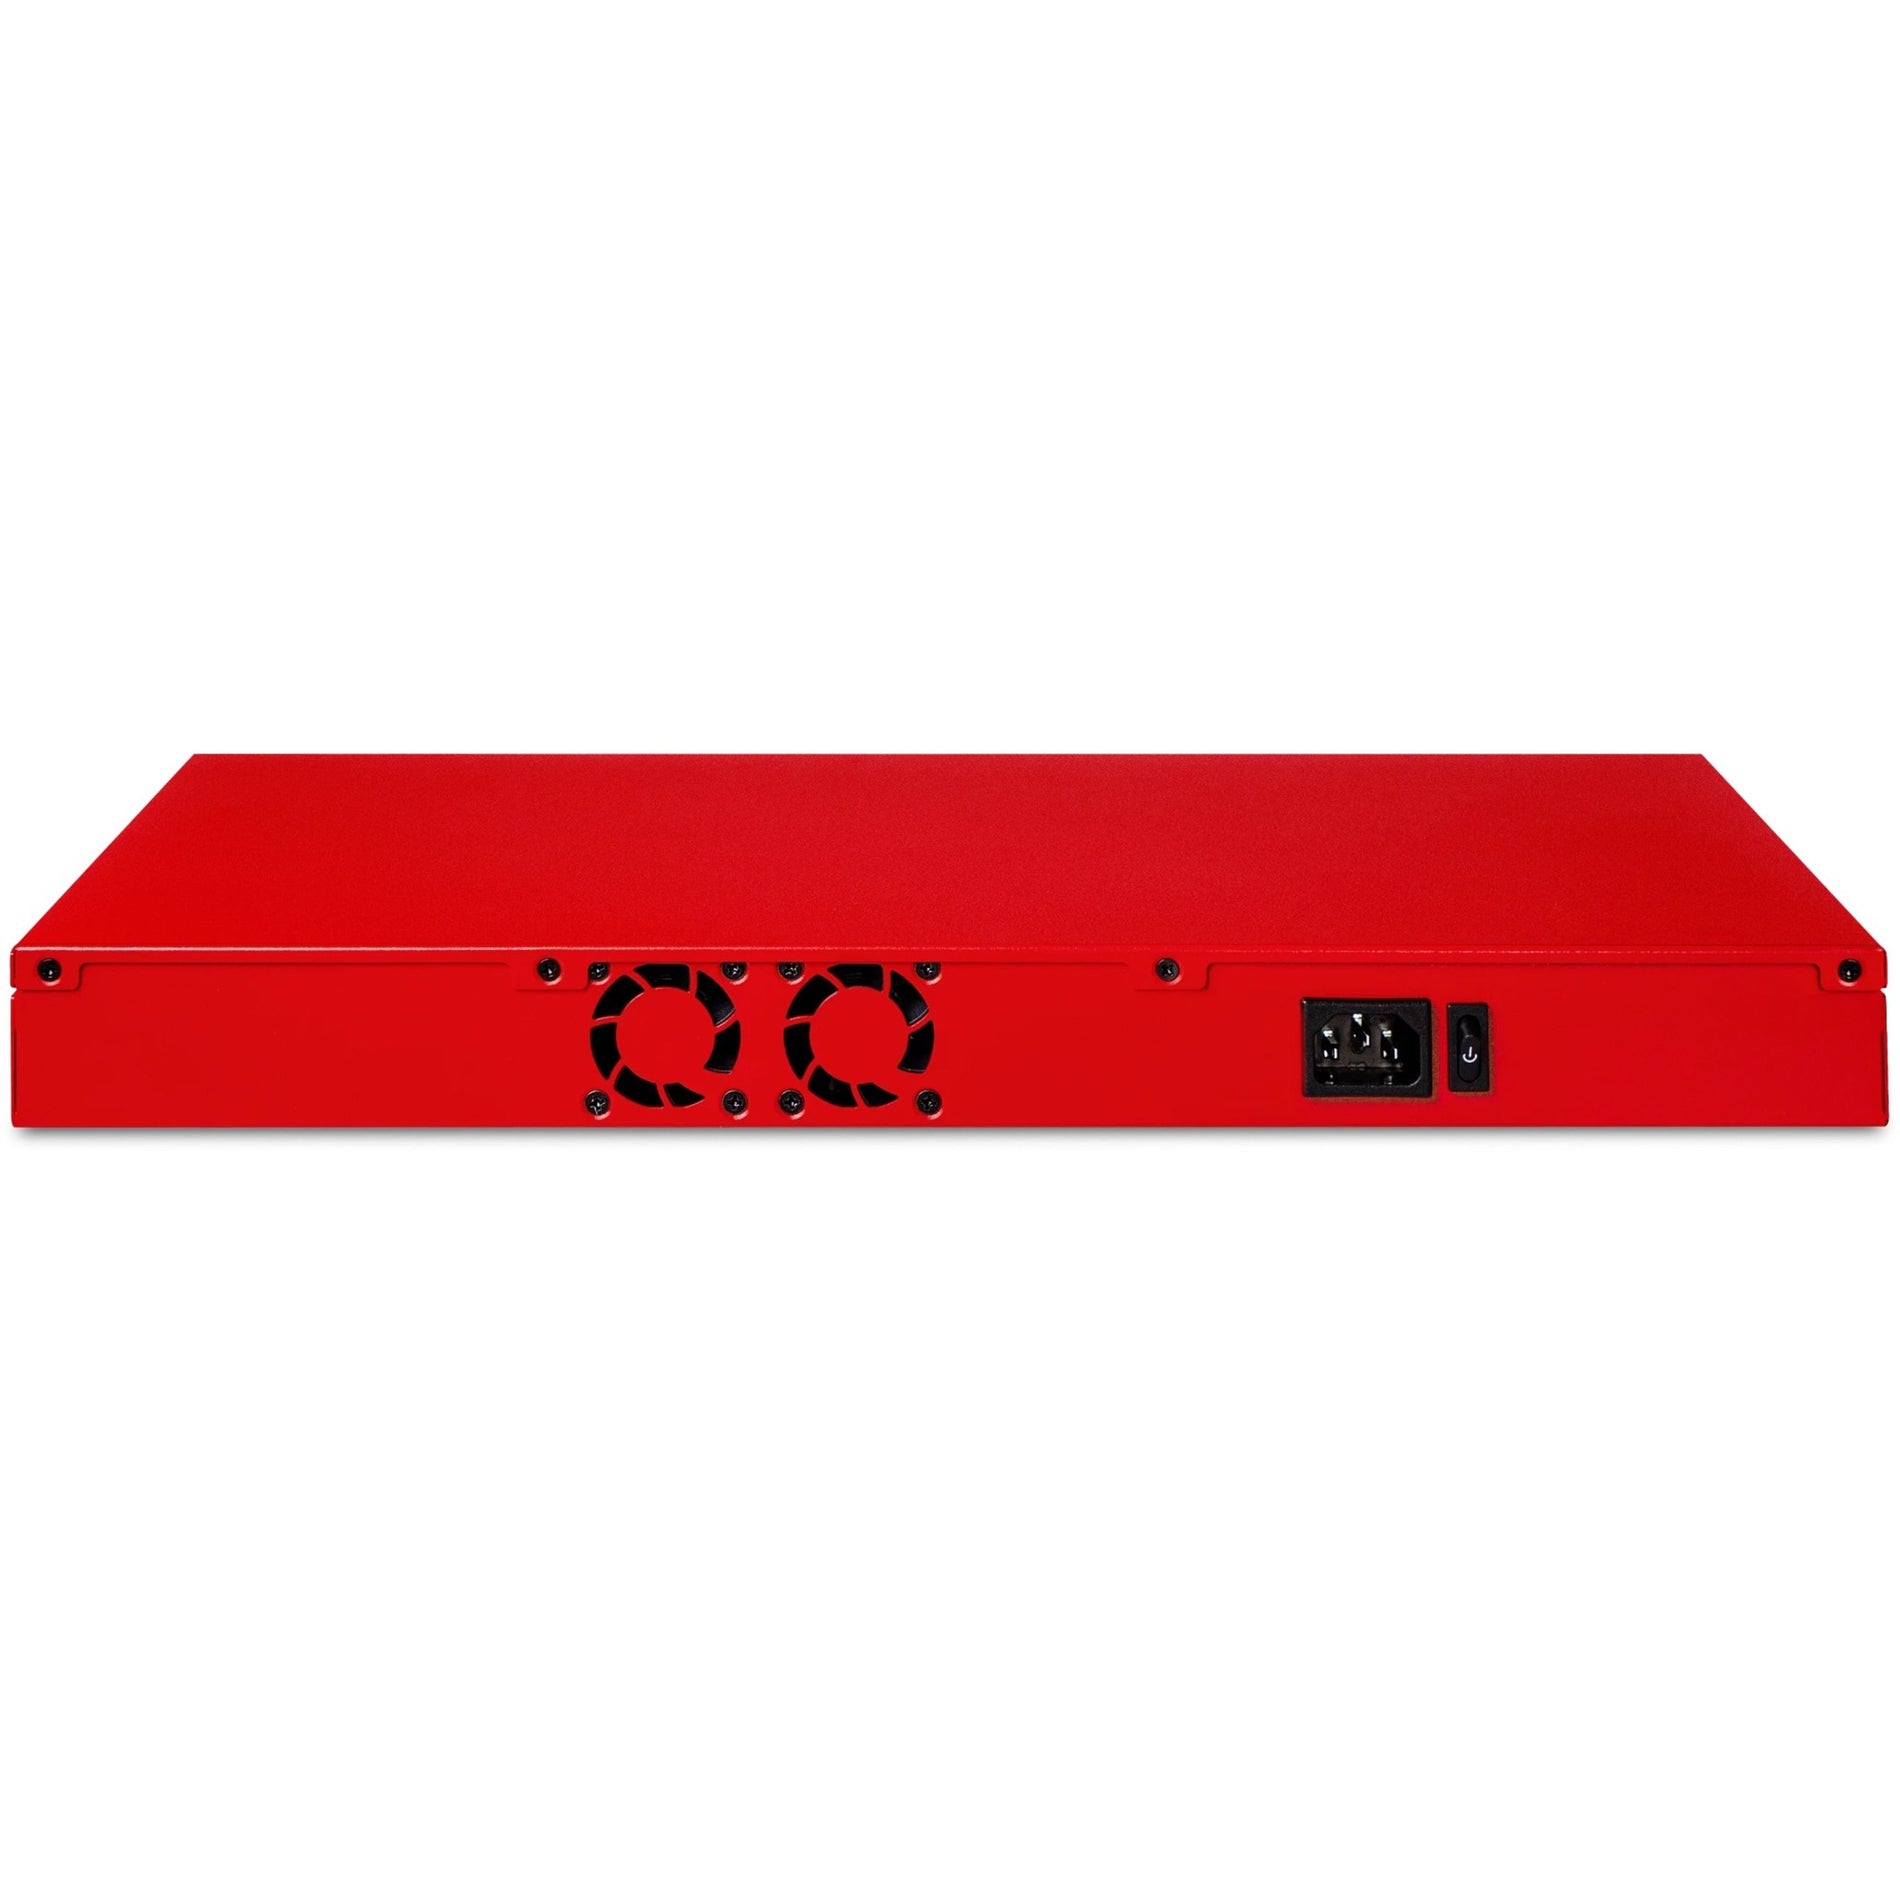 WatchGuard WGM29000803 Firebox M290 Network Security/Firewall Appliance, 8 Ports, 3-Year Total Security Suite